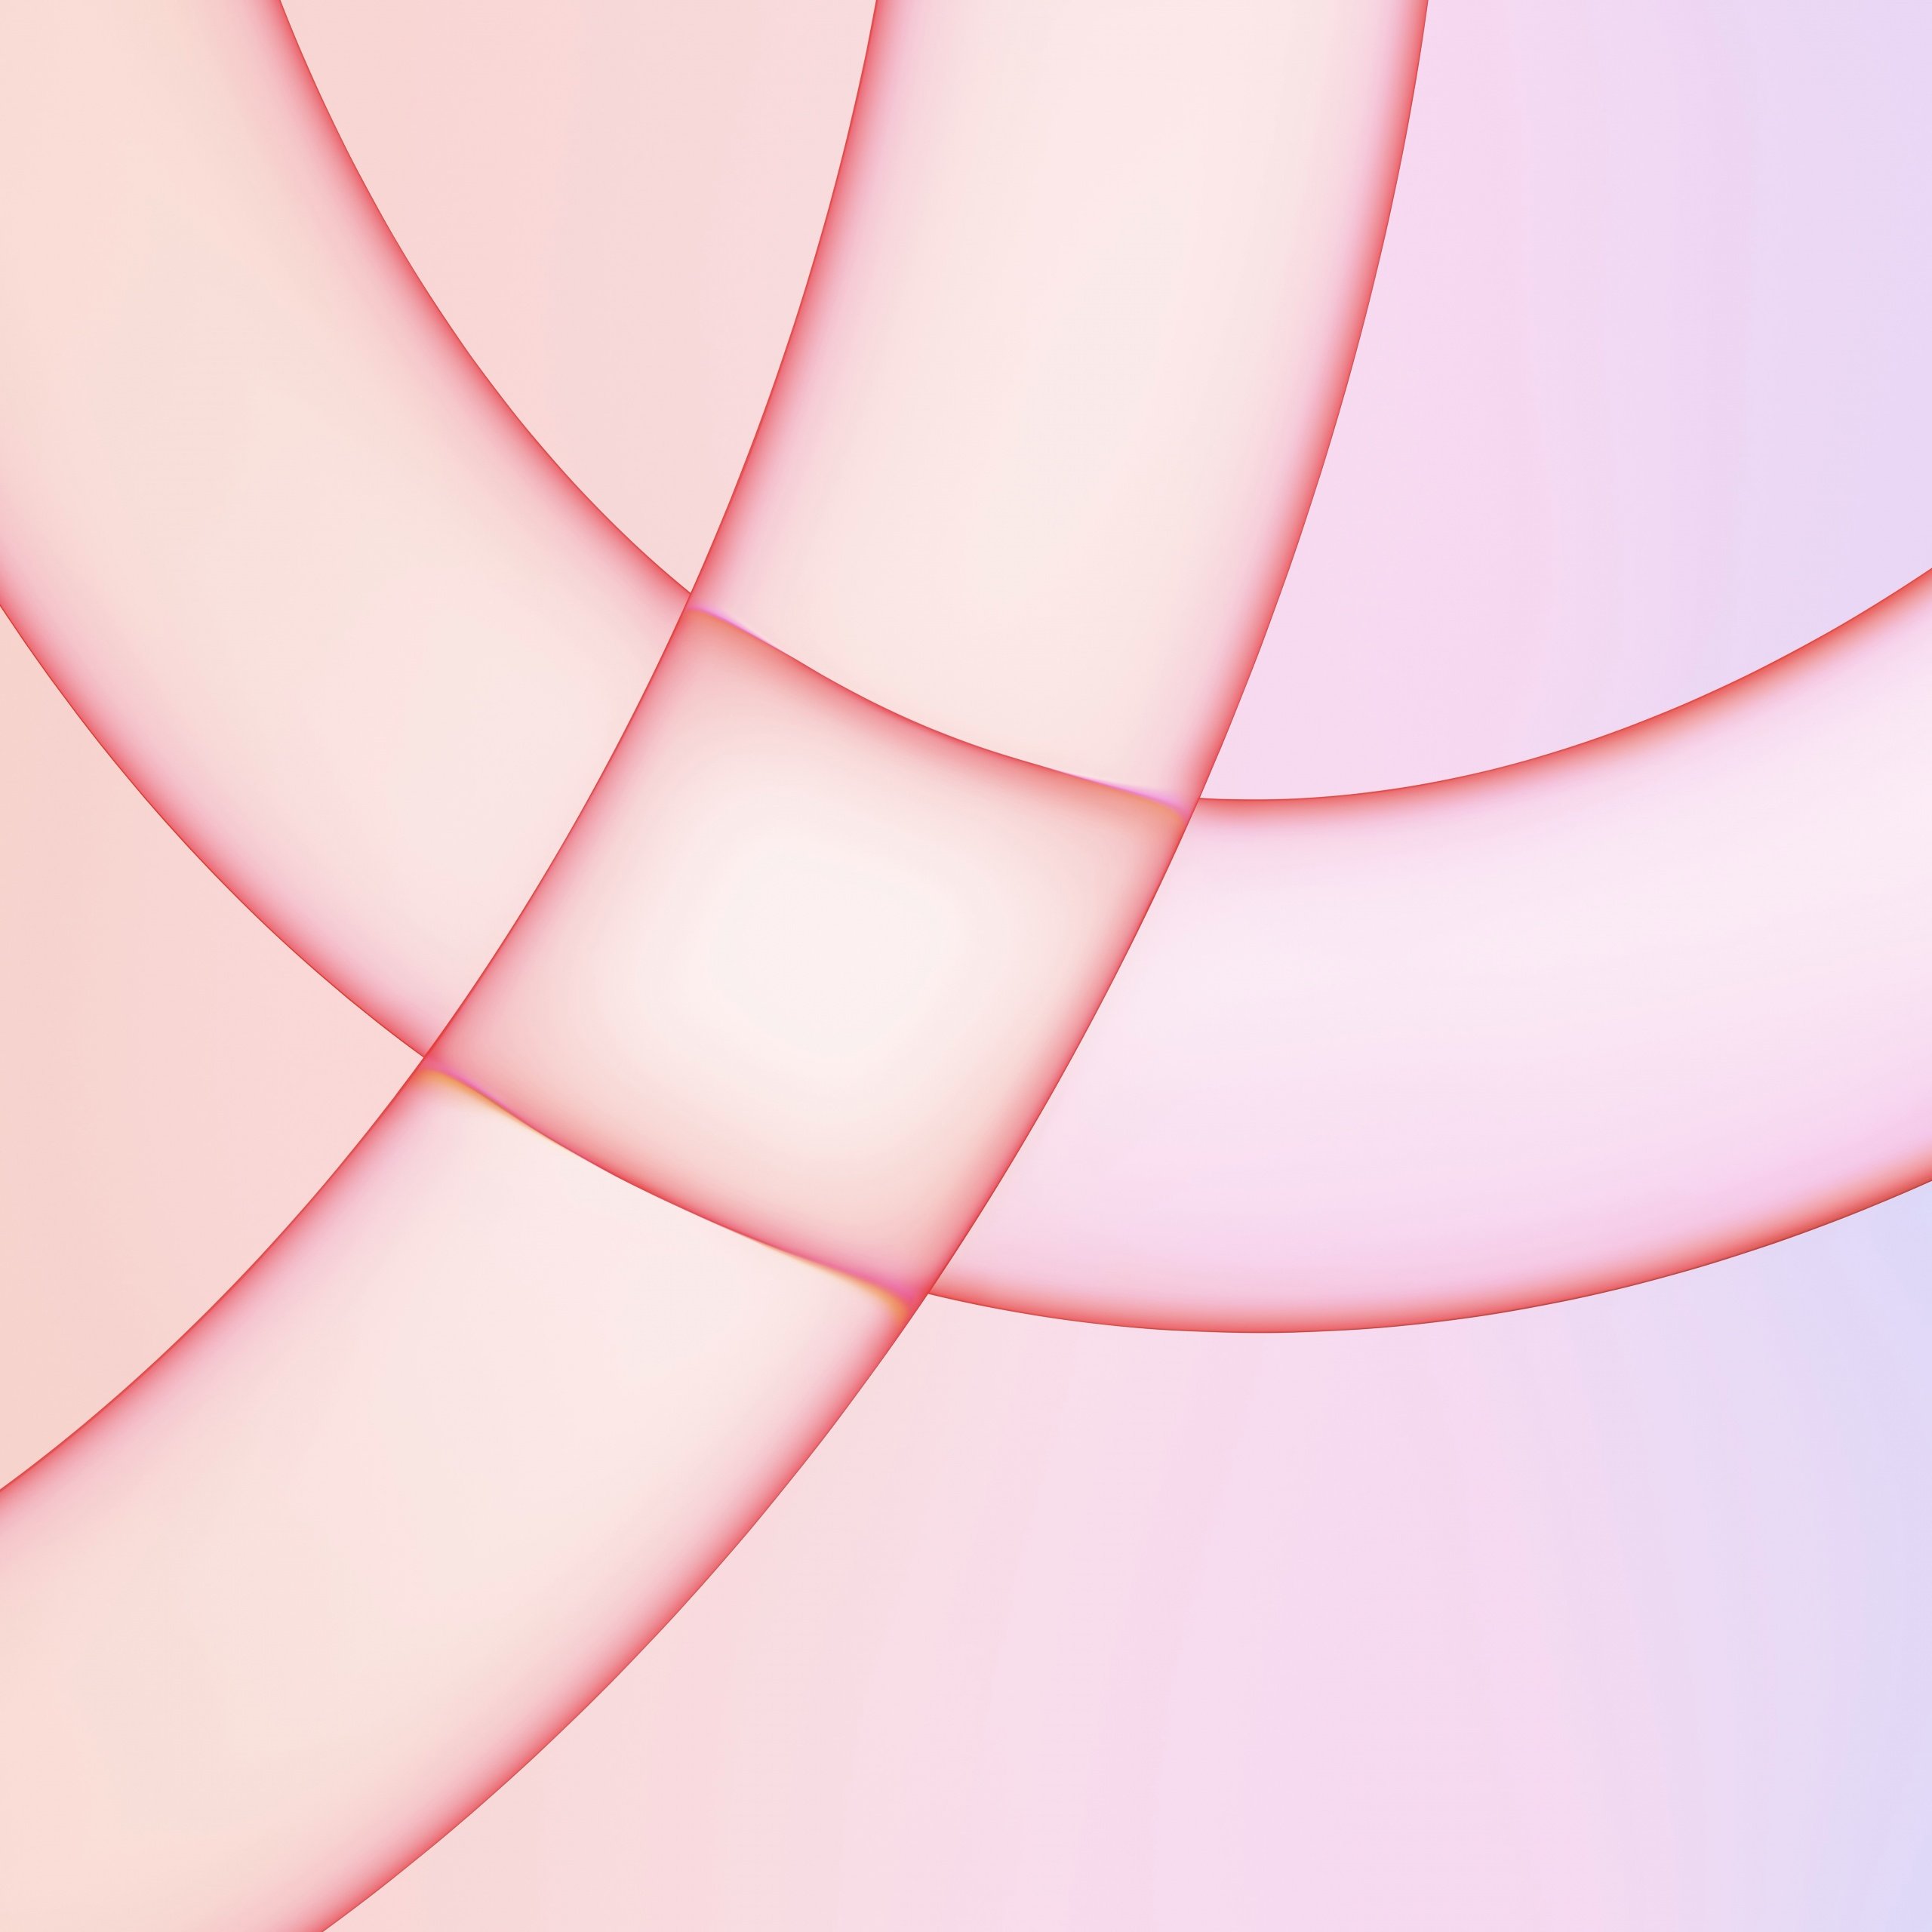 iMac 2021 Wallpaper 4K, Apple Event Stock, Pink background, 5K, Abstract